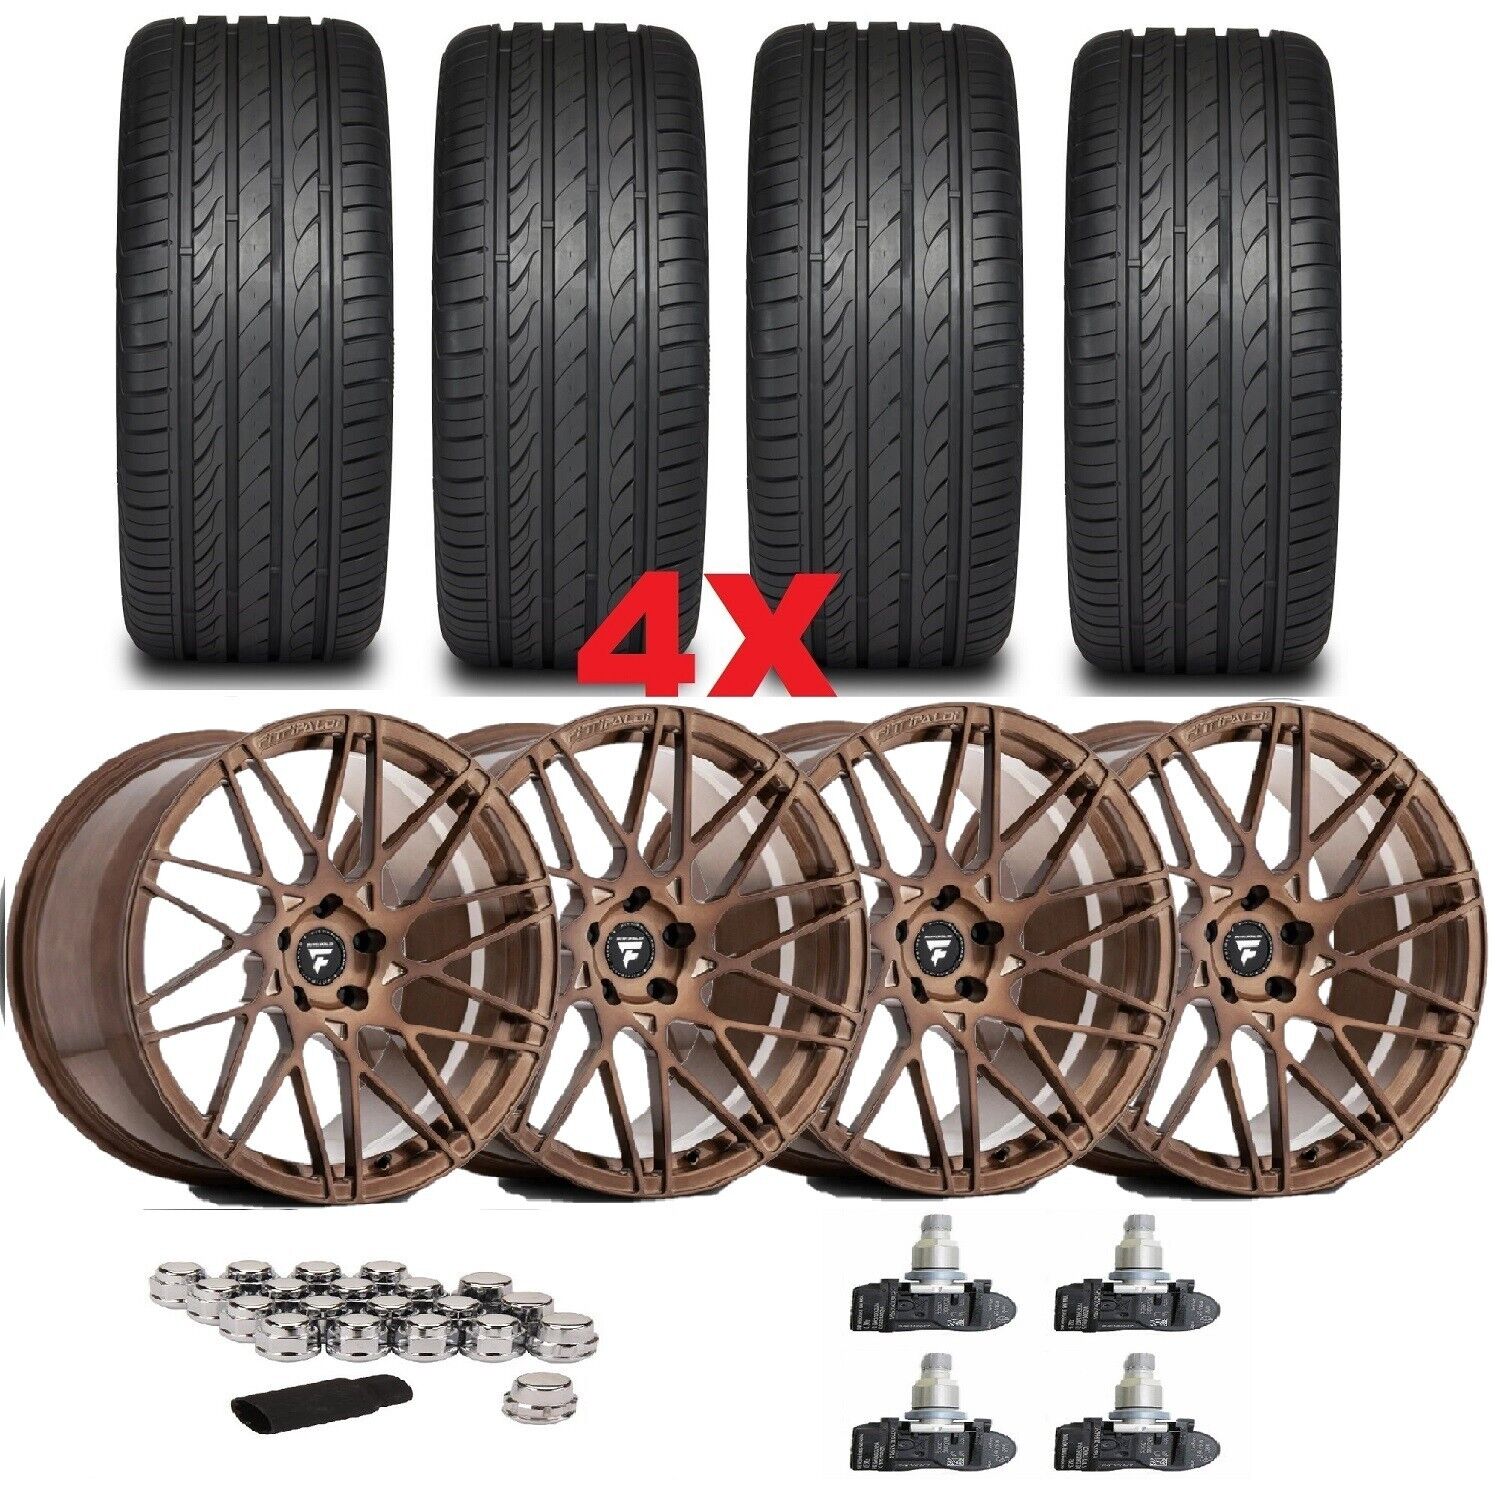 BRONZE BRUSHED WHEELS RIMS TIRES 235 40 19 PACKAGE SET NEW OE ALLOY